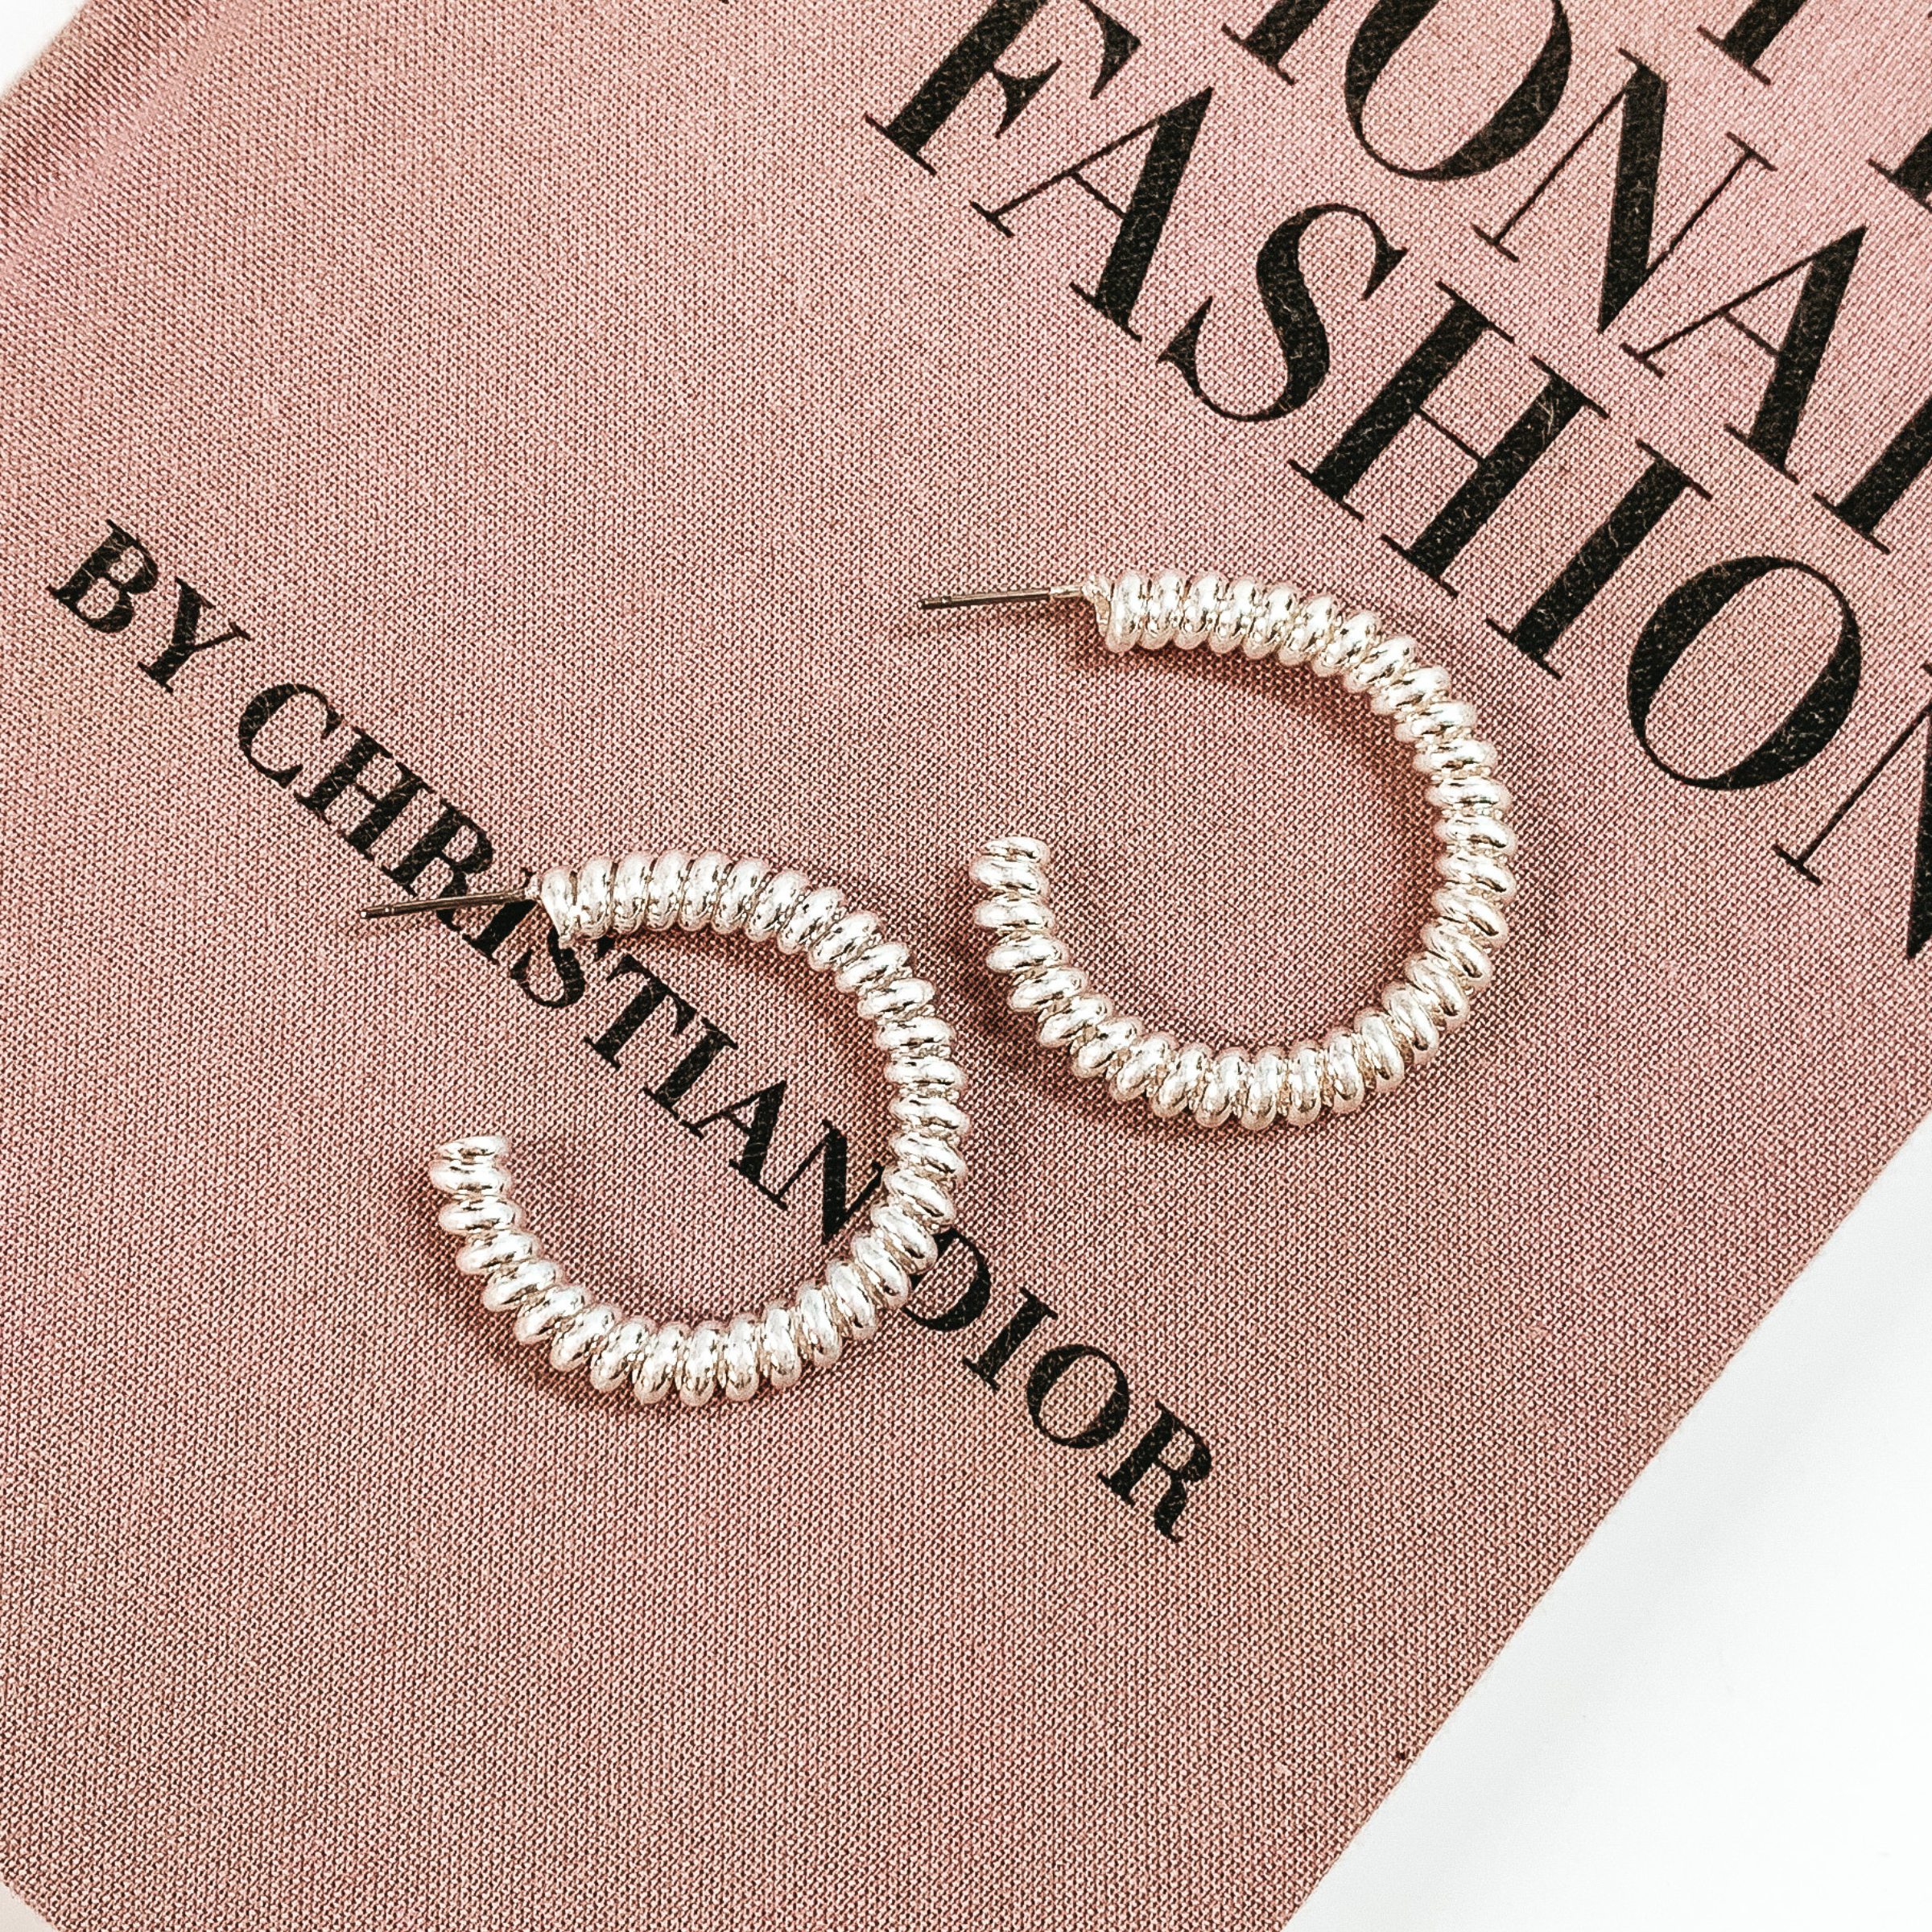 Silver, spiral hoop earrings pictured on a mauve colored book on a white background. 